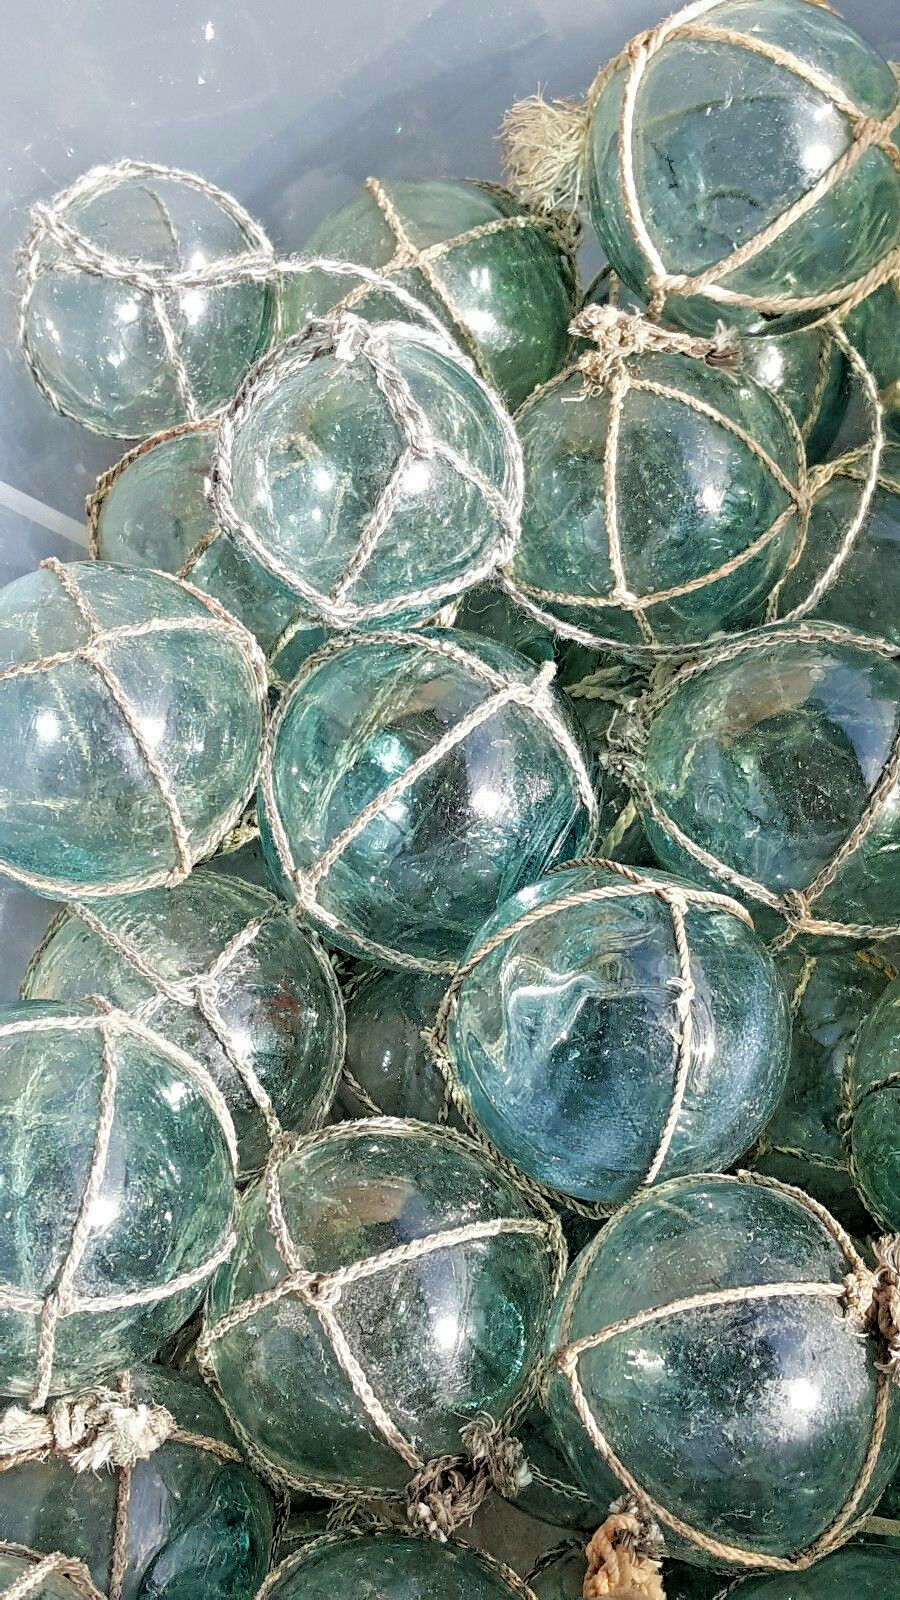 Japanese Glass Fishing FLOATS 2 LOT-5 Round NETTED Buoy Balls